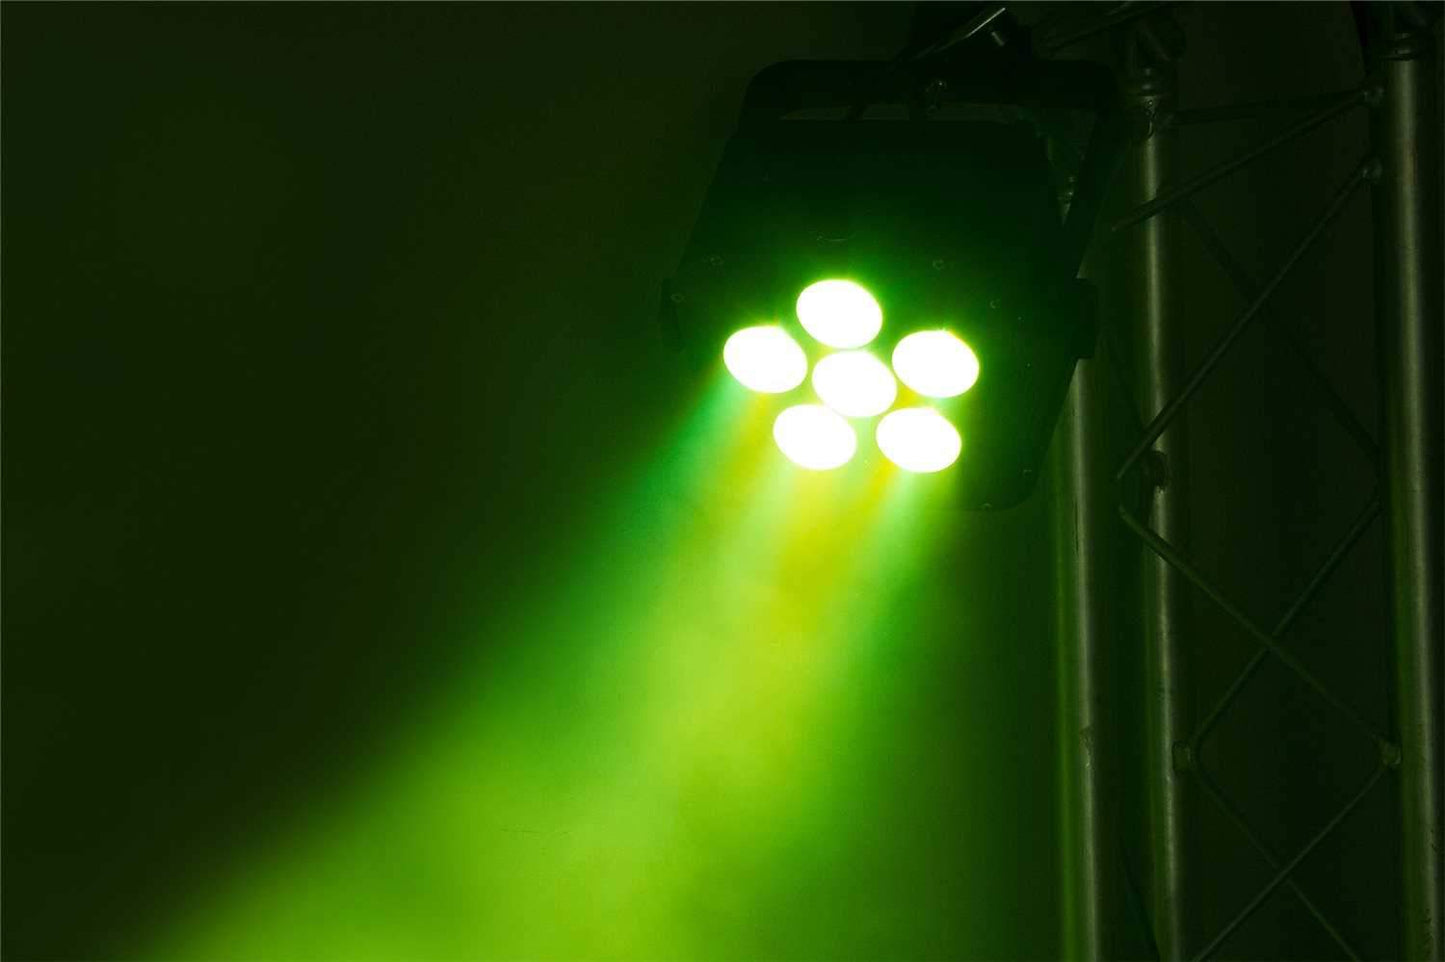 ColorKey MobilePar Hex 6 RGBAW Plus UV Battery Powered LED Light - PSSL ProSound and Stage Lighting